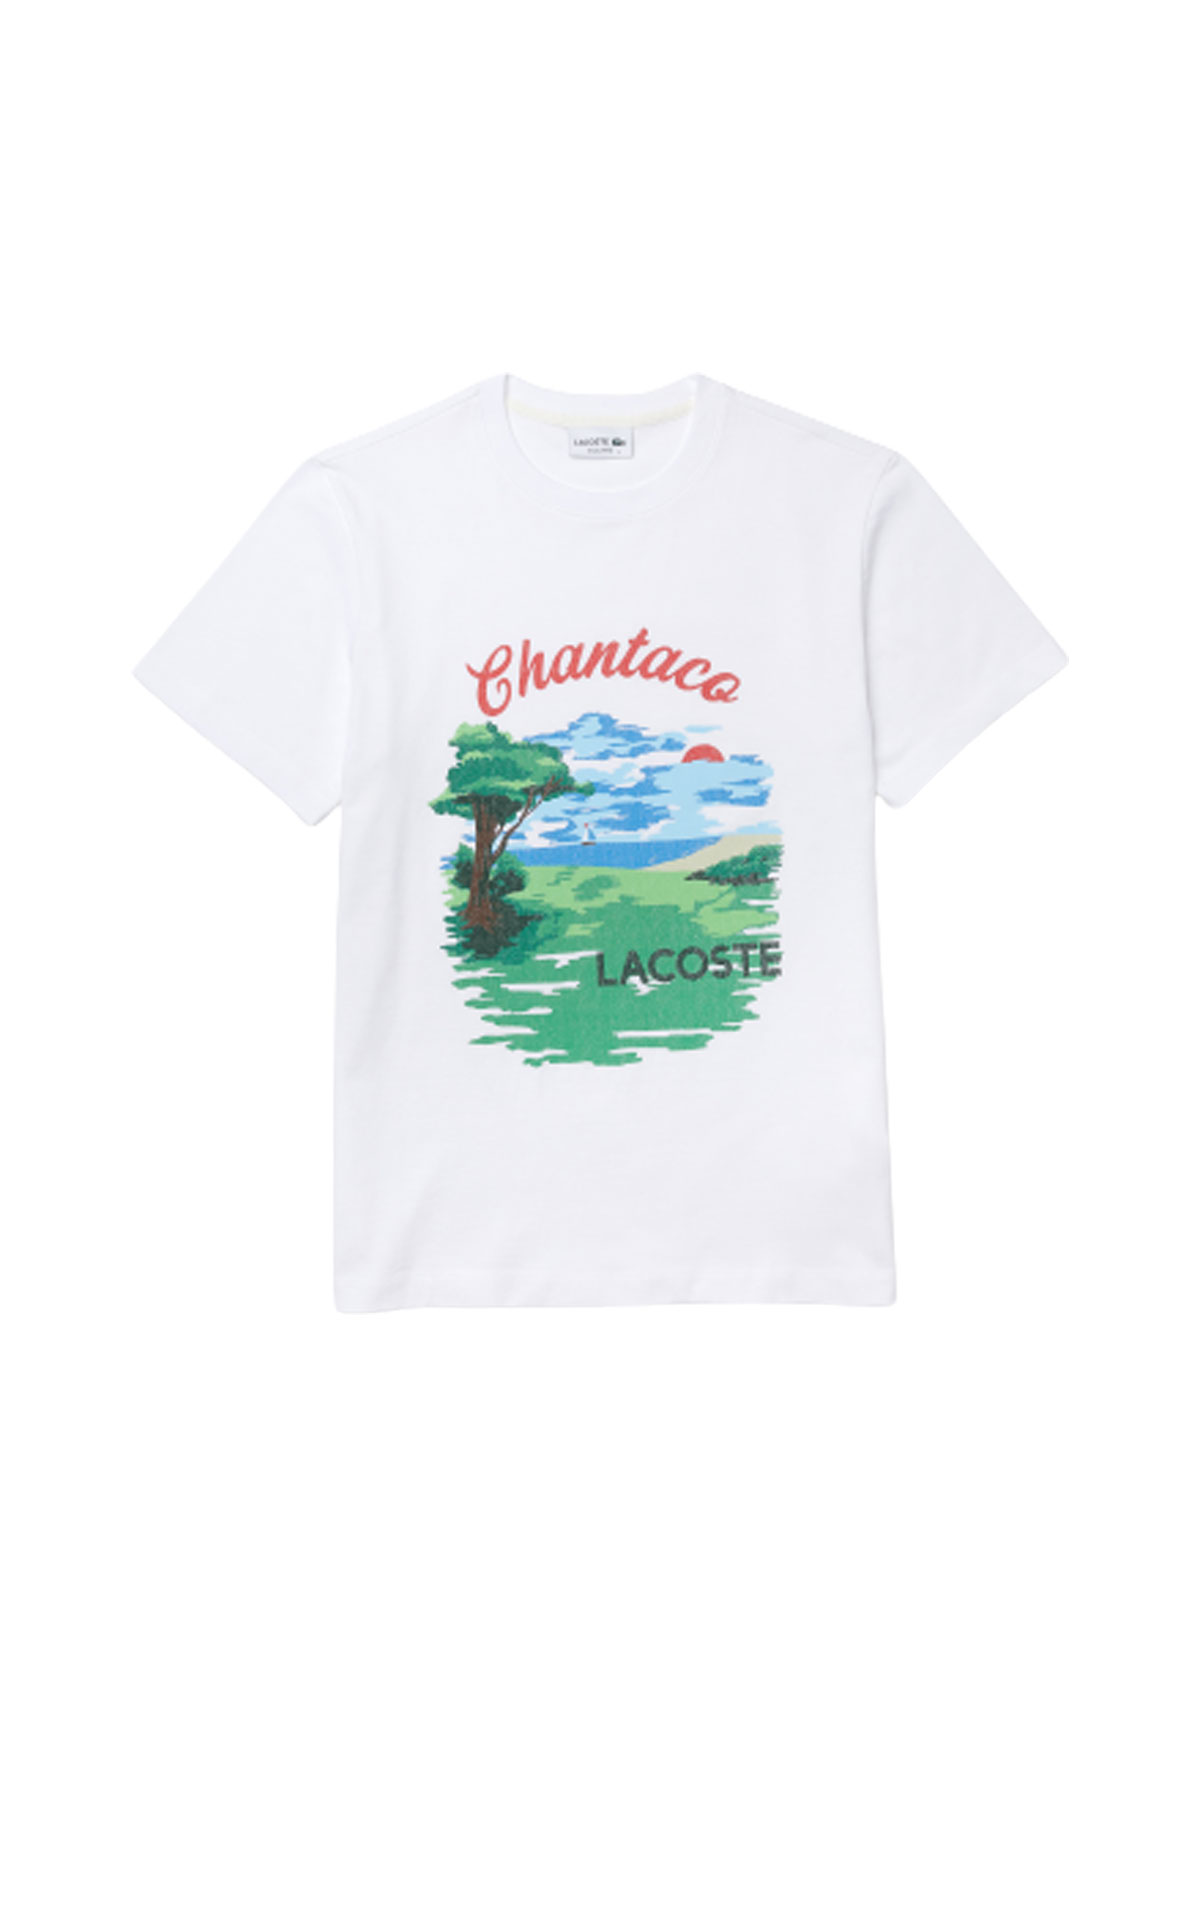 Lacoste Landscape print t-shirt white from Bicester Village